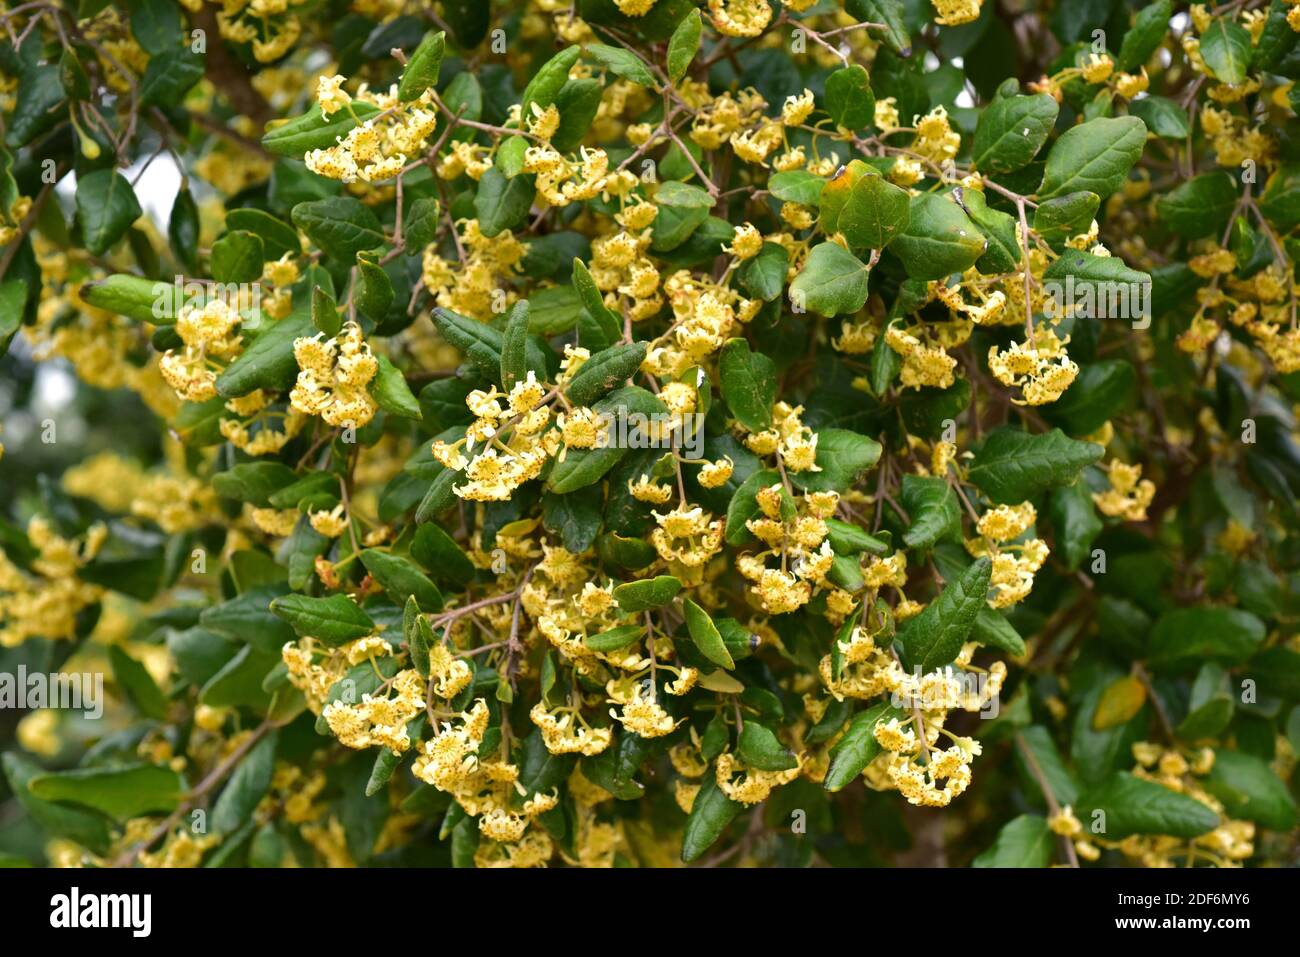 Boldo (Peumus boldus) is a tree endemic to Chile. Its leaves are used for culinary and medicinal purposes. Stock Photo